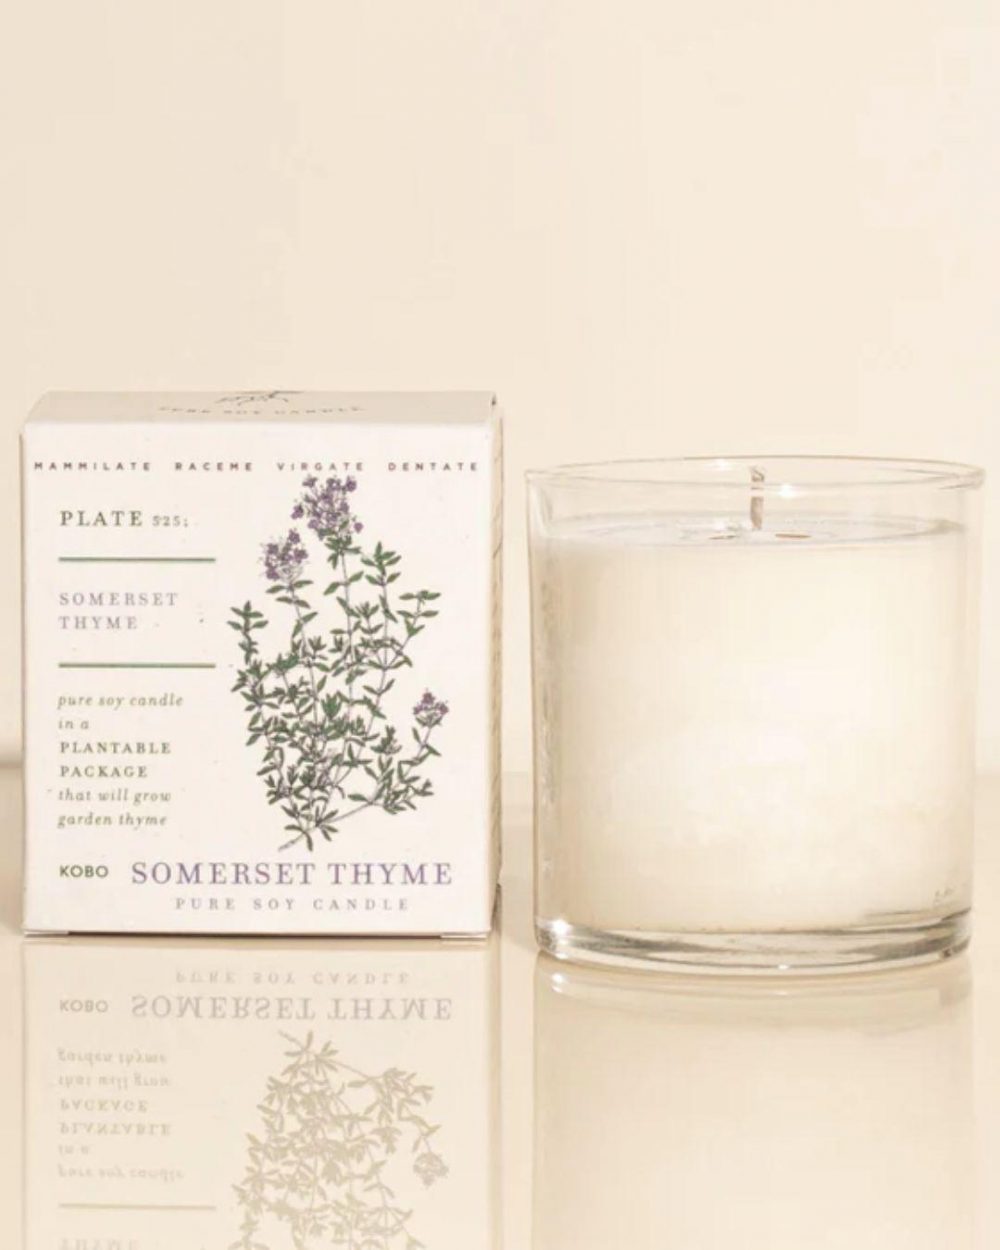 Kobo Plant the Box Candles